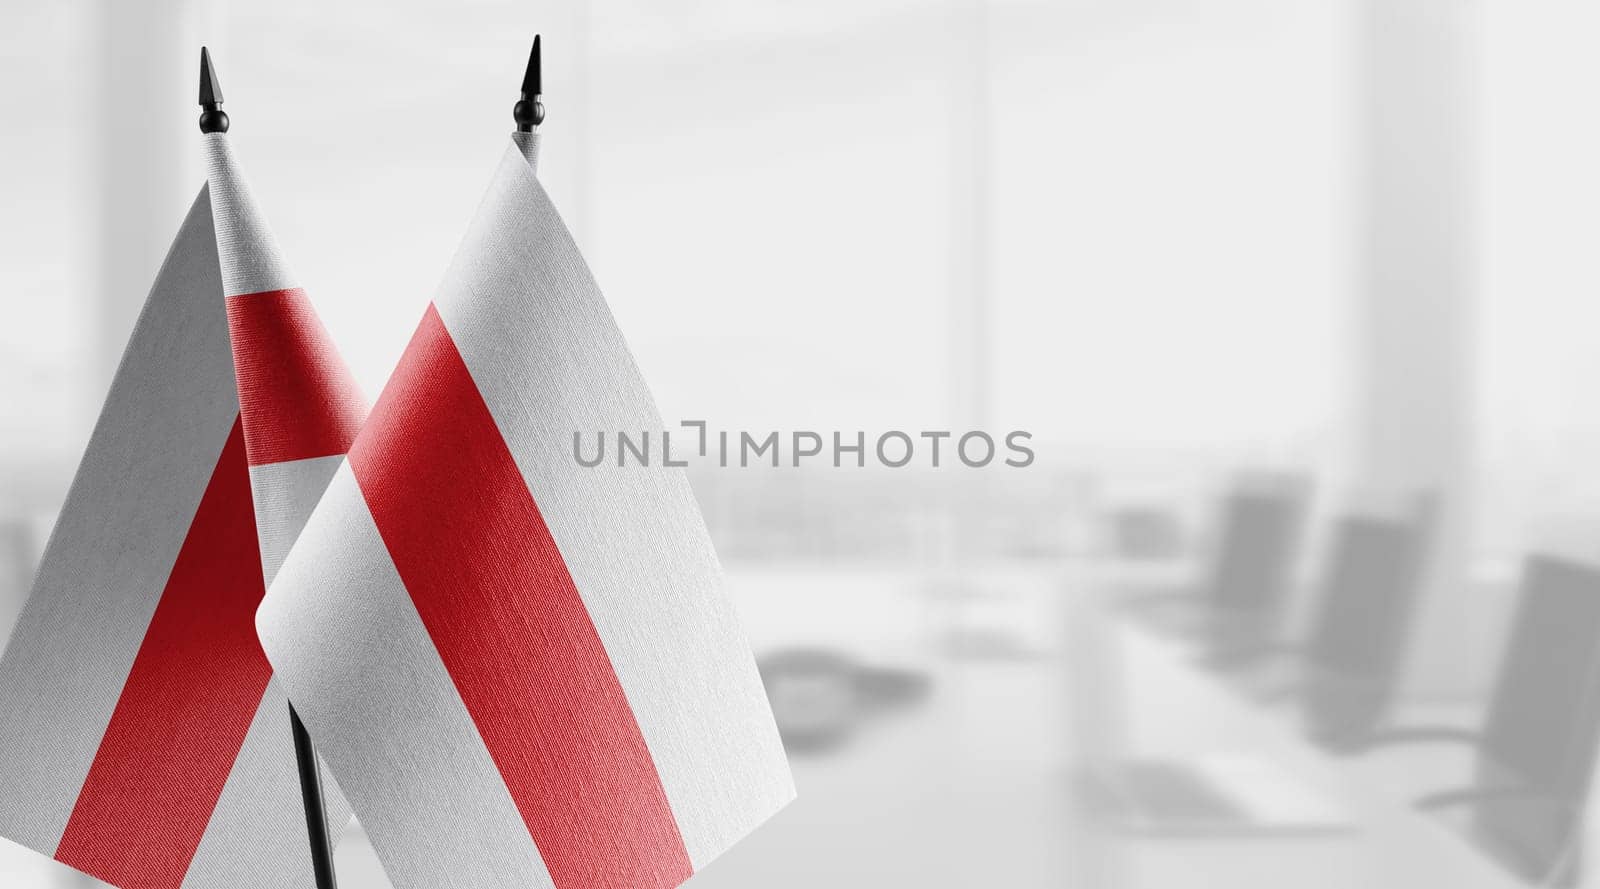 A small Belarus flag on an abstract blurry background by butenkow